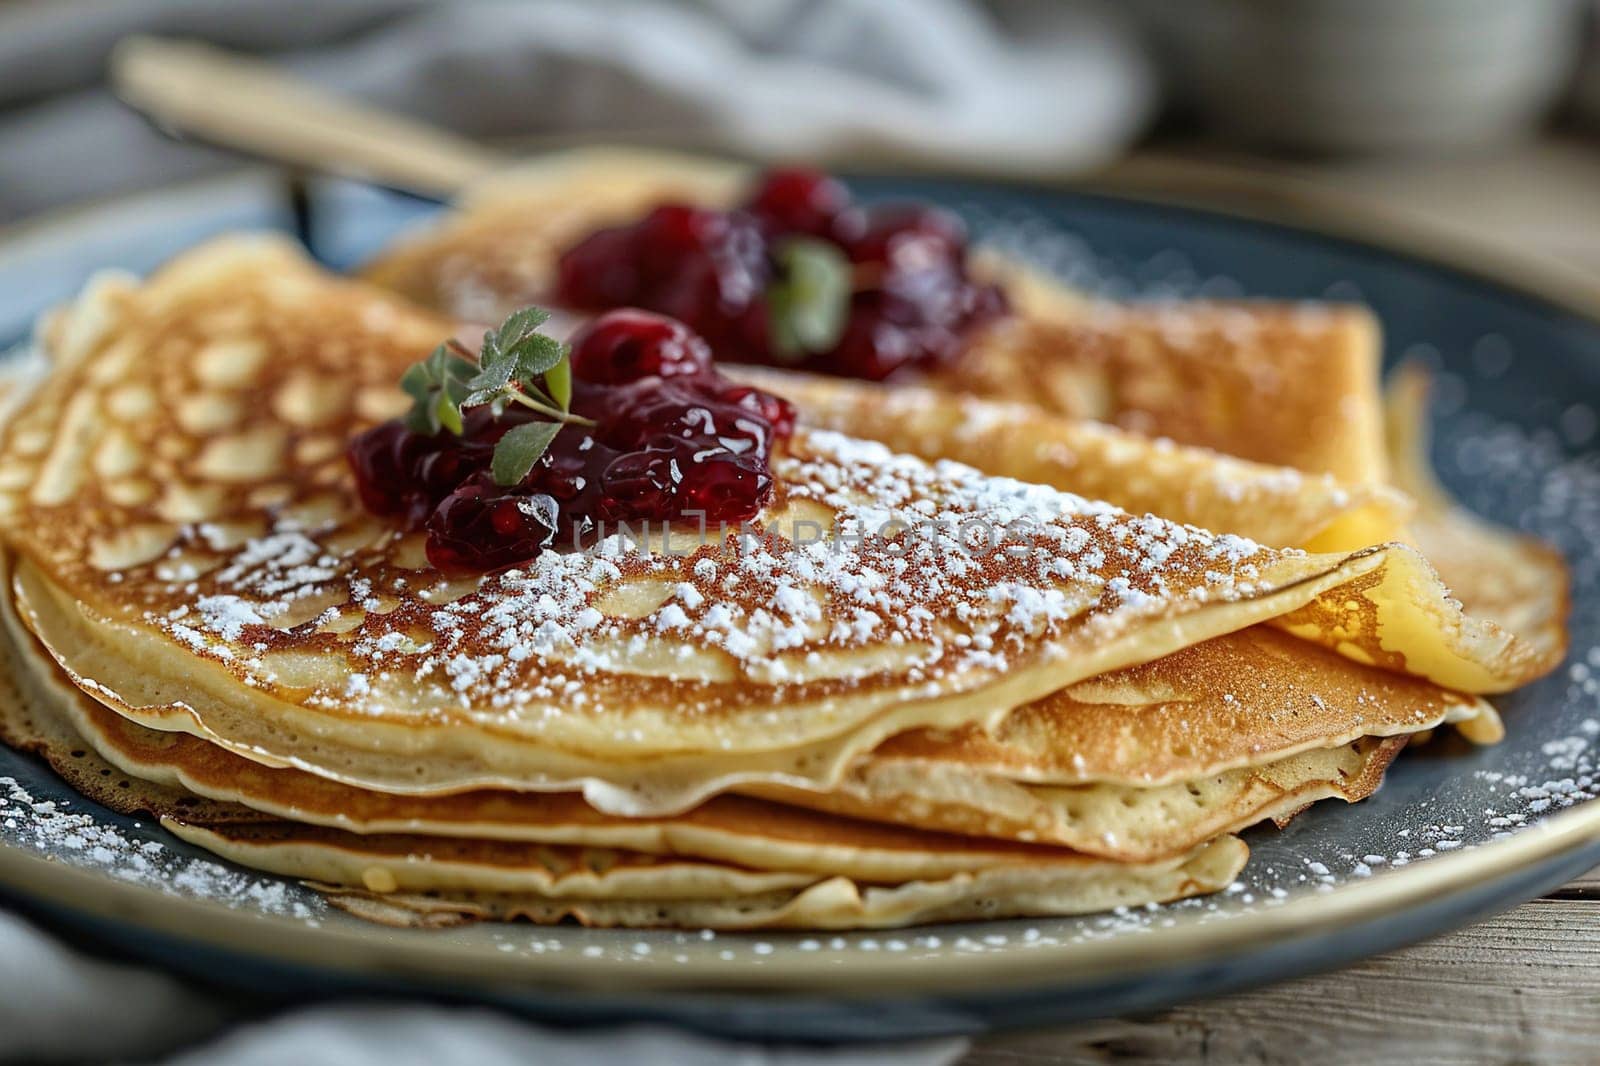 A stack of pancakes with lingonberry sauce on a plate on a wooden table. Swedish cuisine dish.